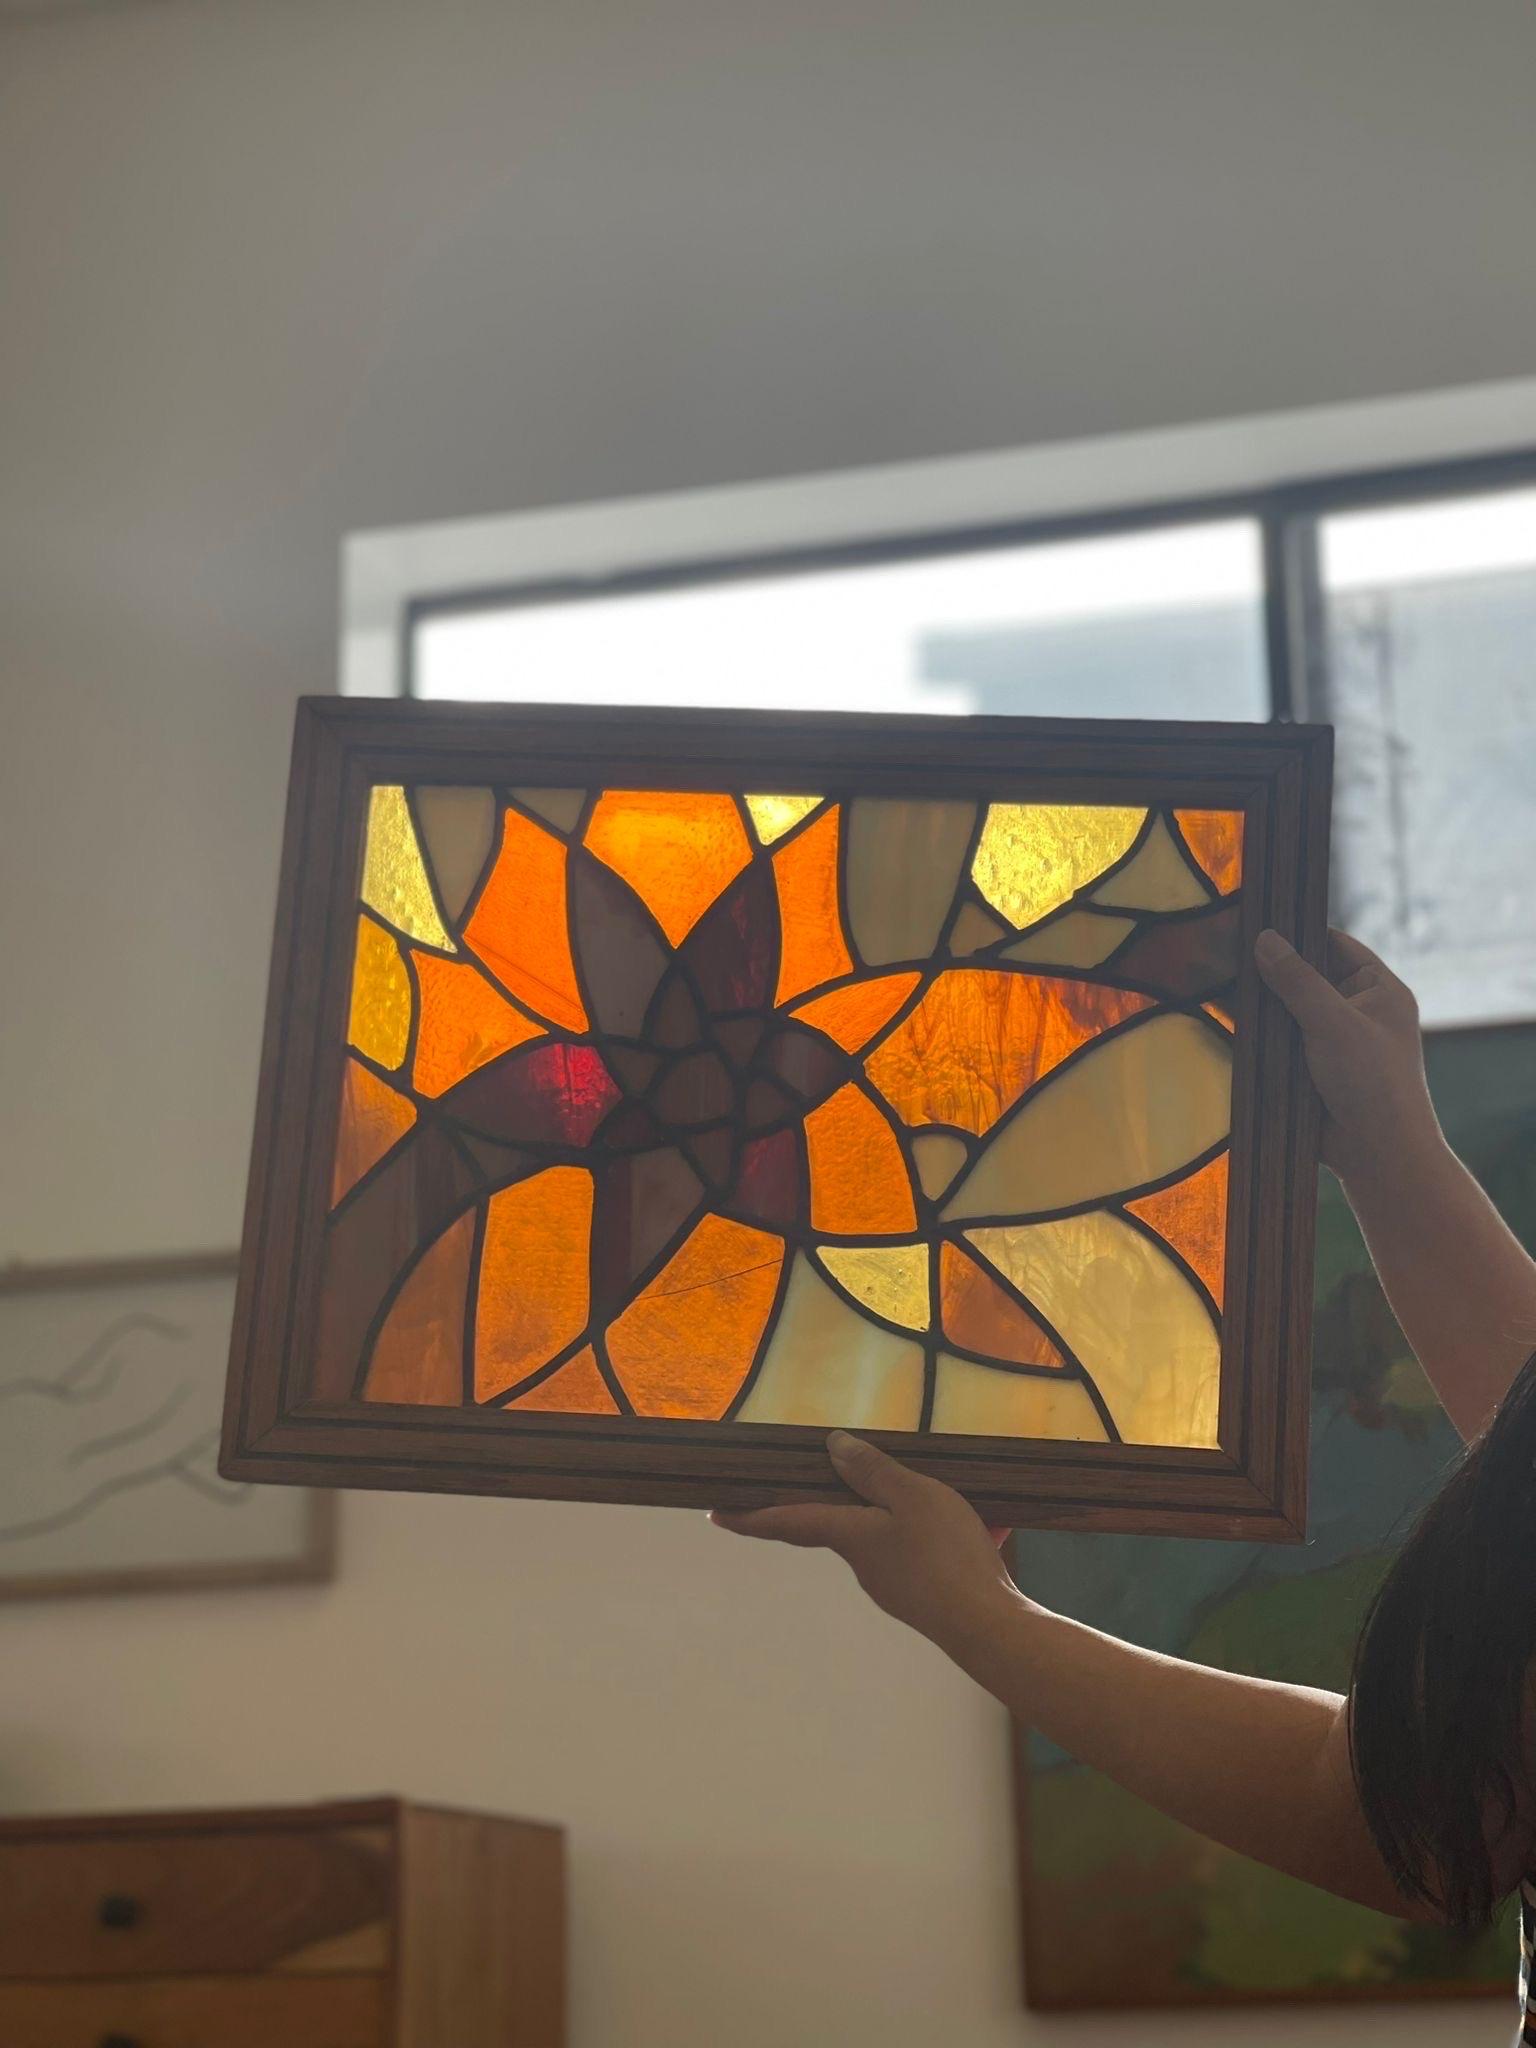 Vintage Framed Stained Glass Brown Beige Yellow White Abstract Flower Pattern.Has a Crack.

Dimensions. 14.5 W ; 1 D ; 19 H